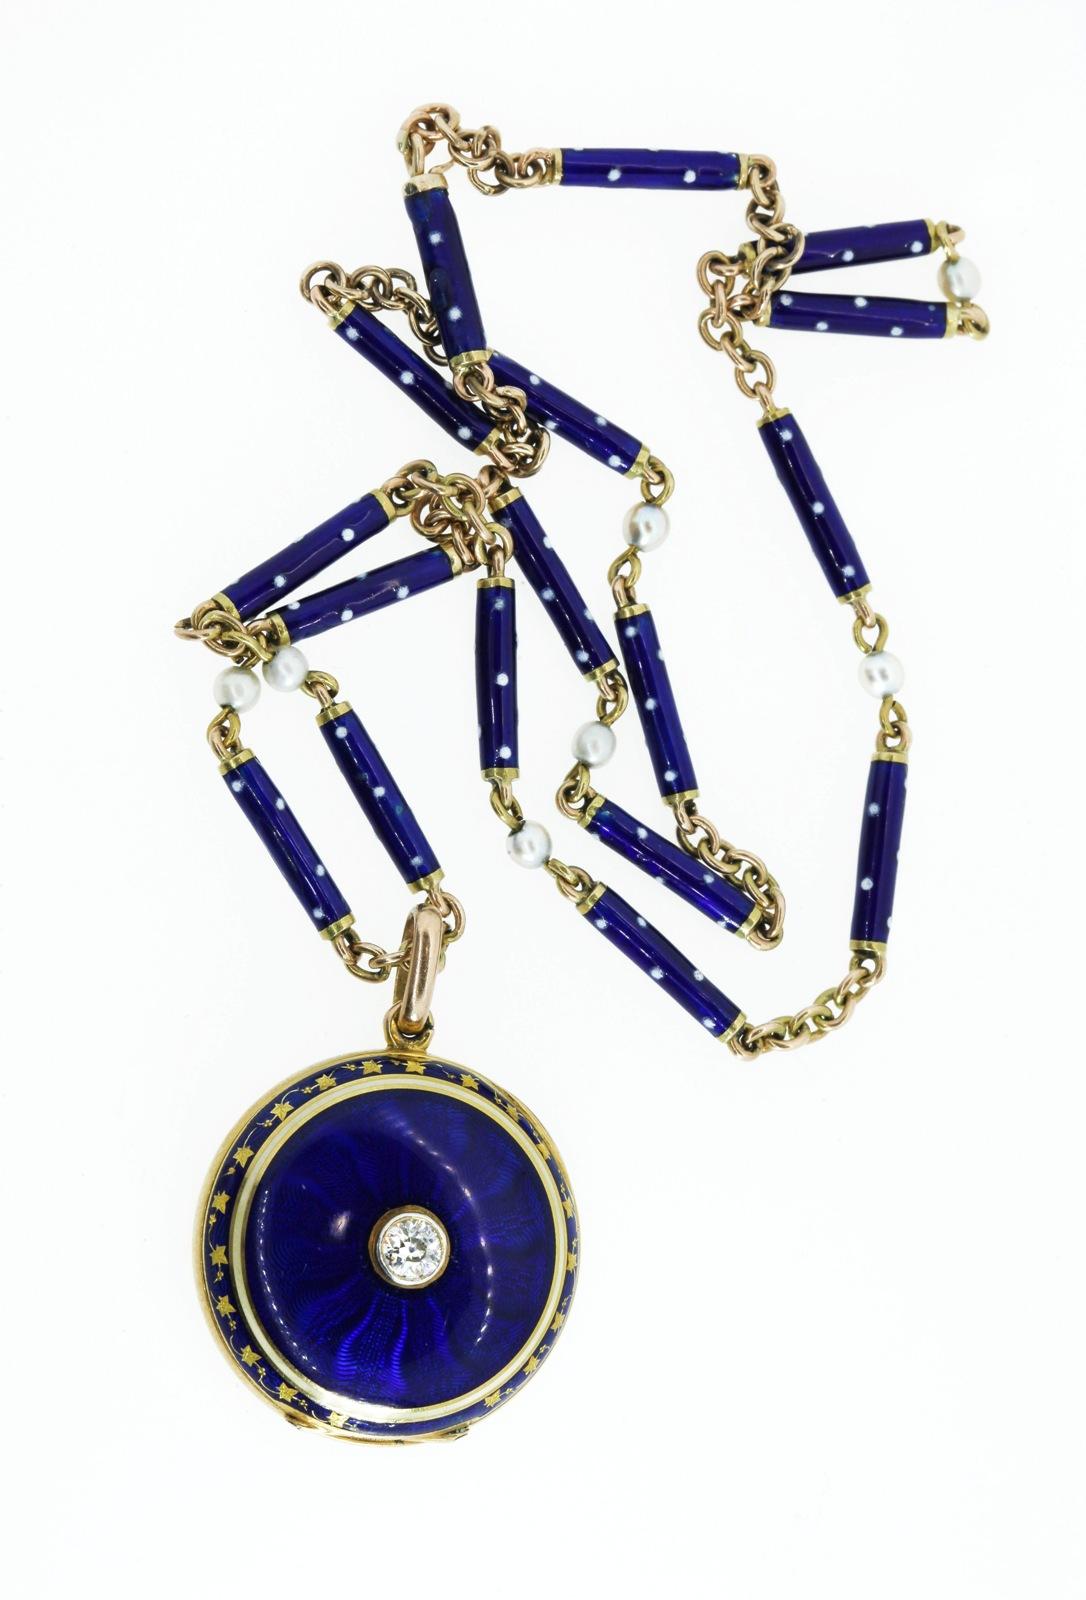 This unusual circa 1910 18KT yellow gold pendant centers an Old European Cut Diamond of approx. 0.28 carat set in a platinum bezel and surrounded by deep Royal blue guilloche enamel.  A circle of creme enamel is completed by a border of blue enamel